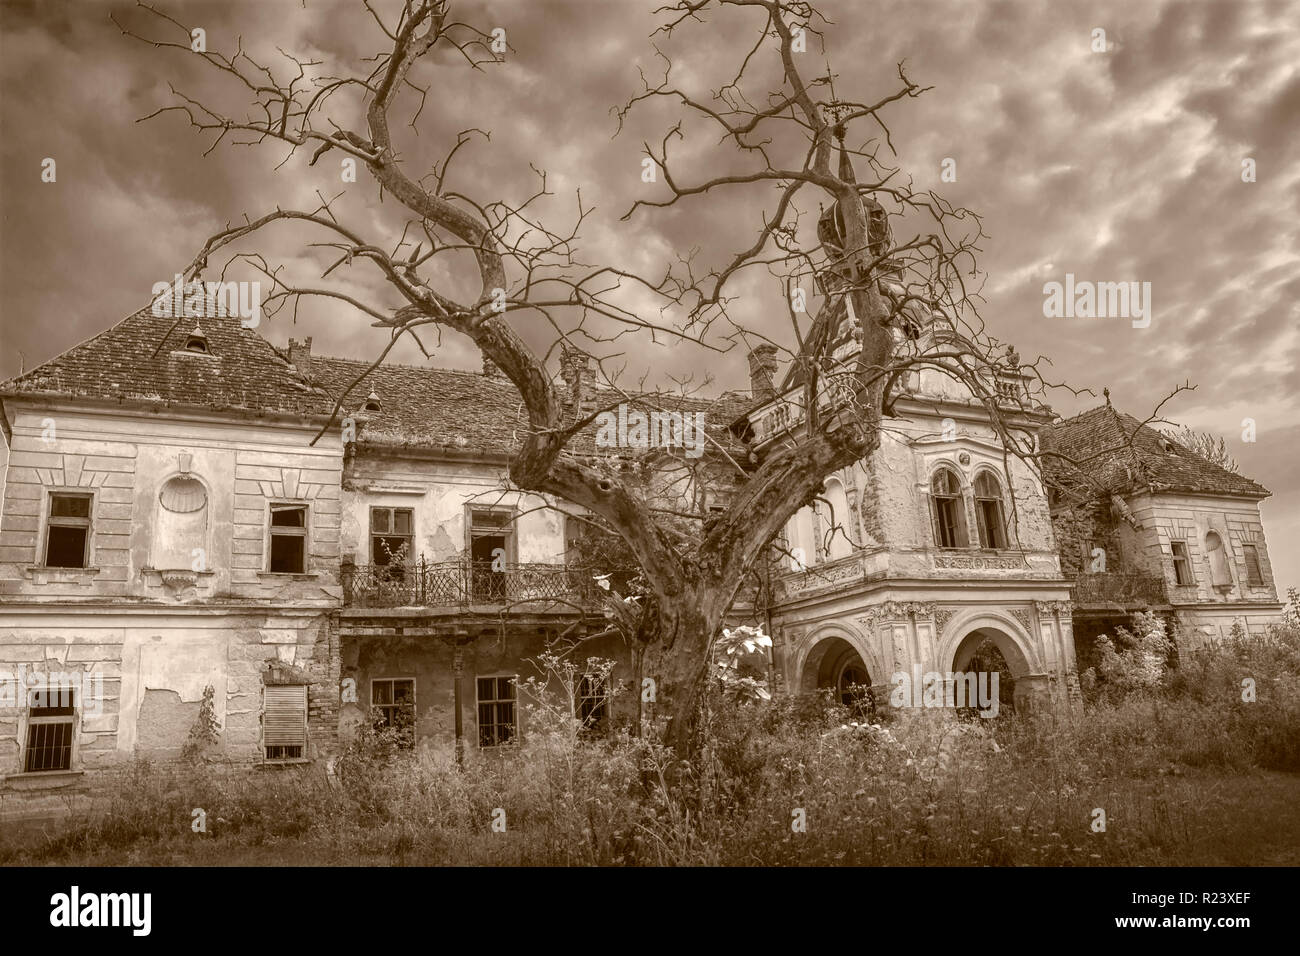 Scary abandoned halloween palace with haunted tree in front Stock Photo